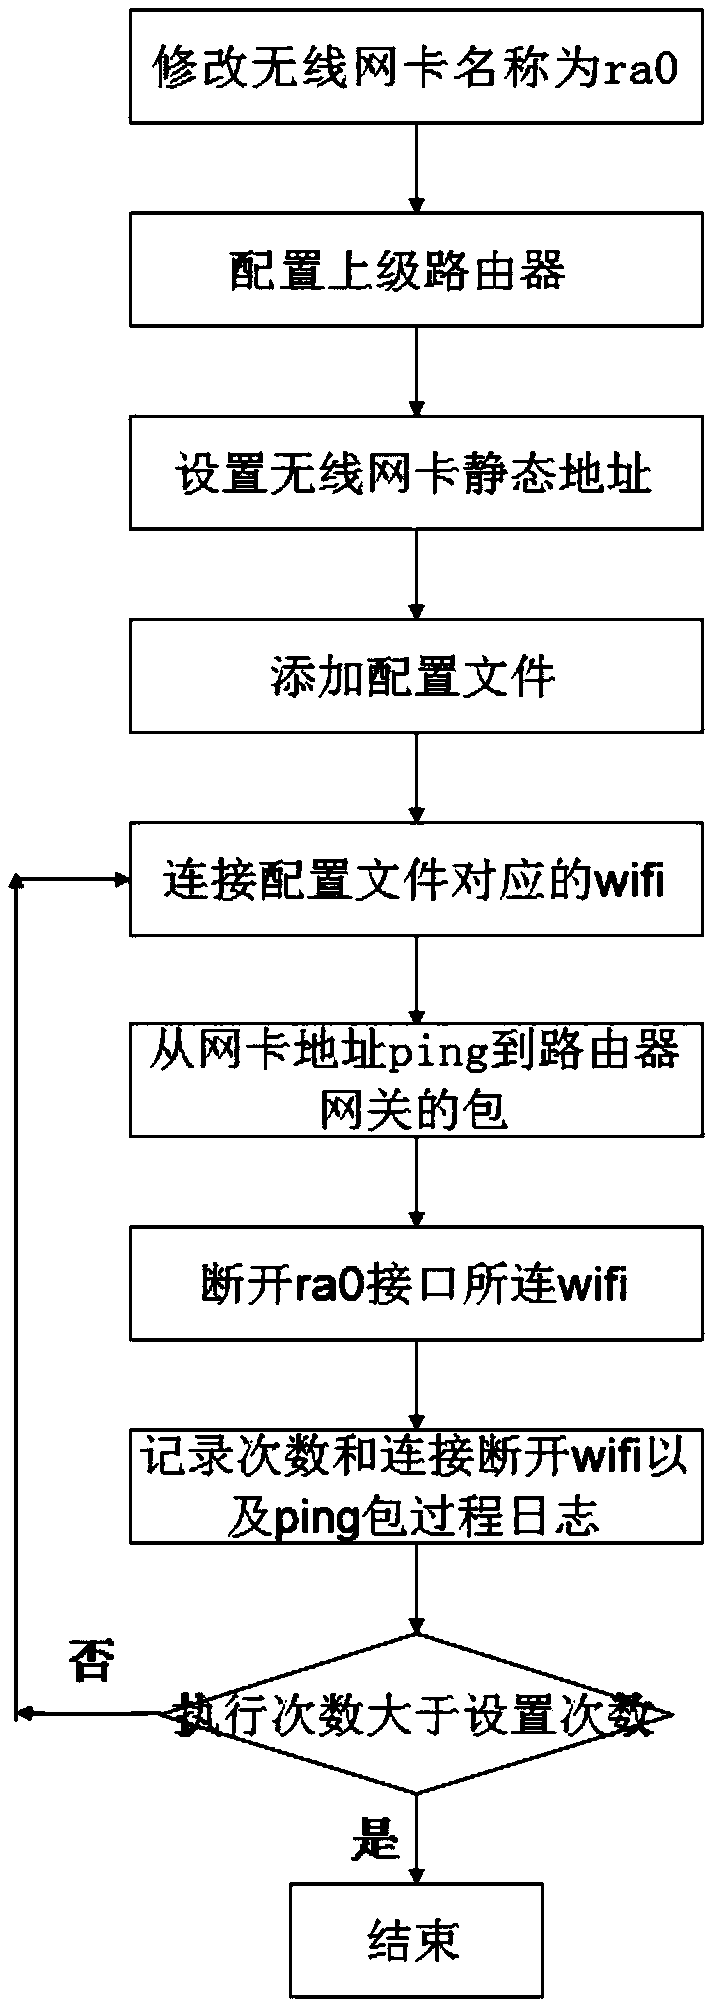 Testing system for wireless network card Wi-Fi connection reliability and testing method